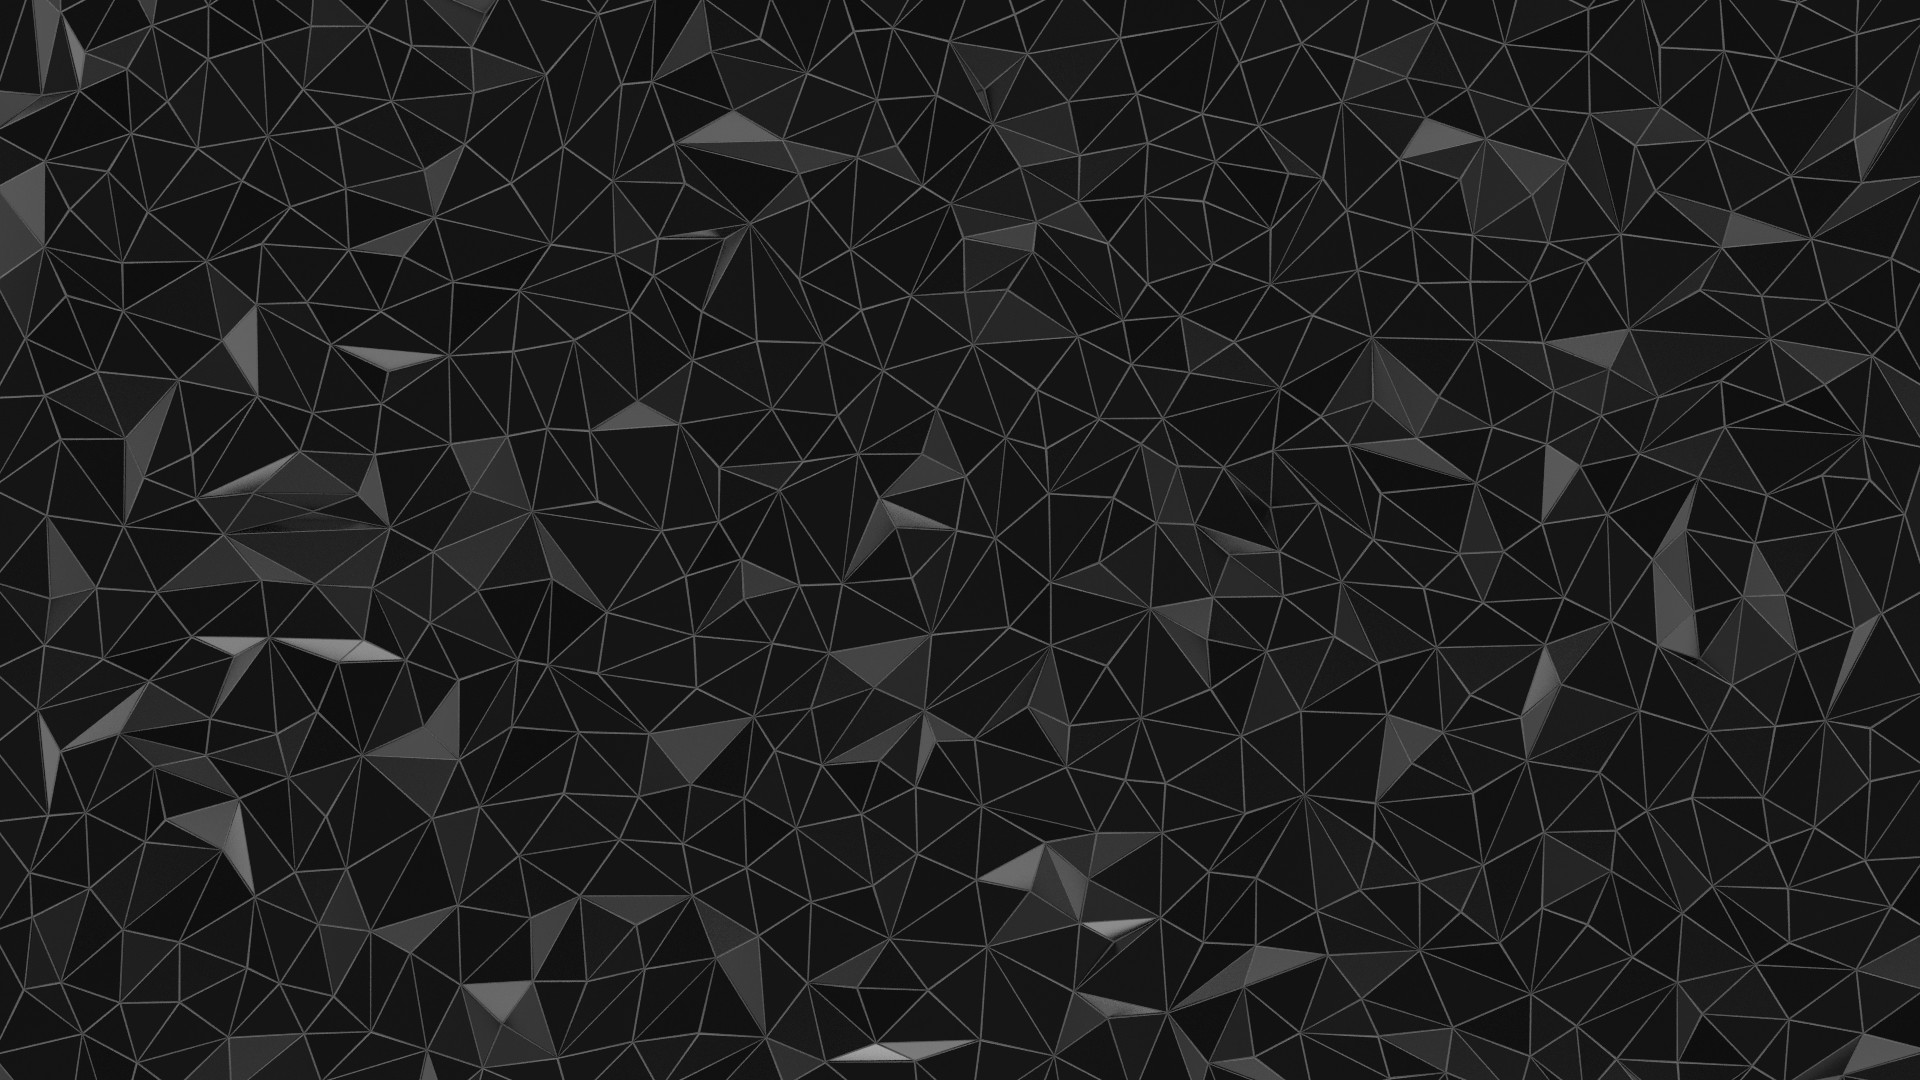 1920x1080 Low Poly Wallpaper by Terrance8d Low Poly Wallpaper by Terrance8d